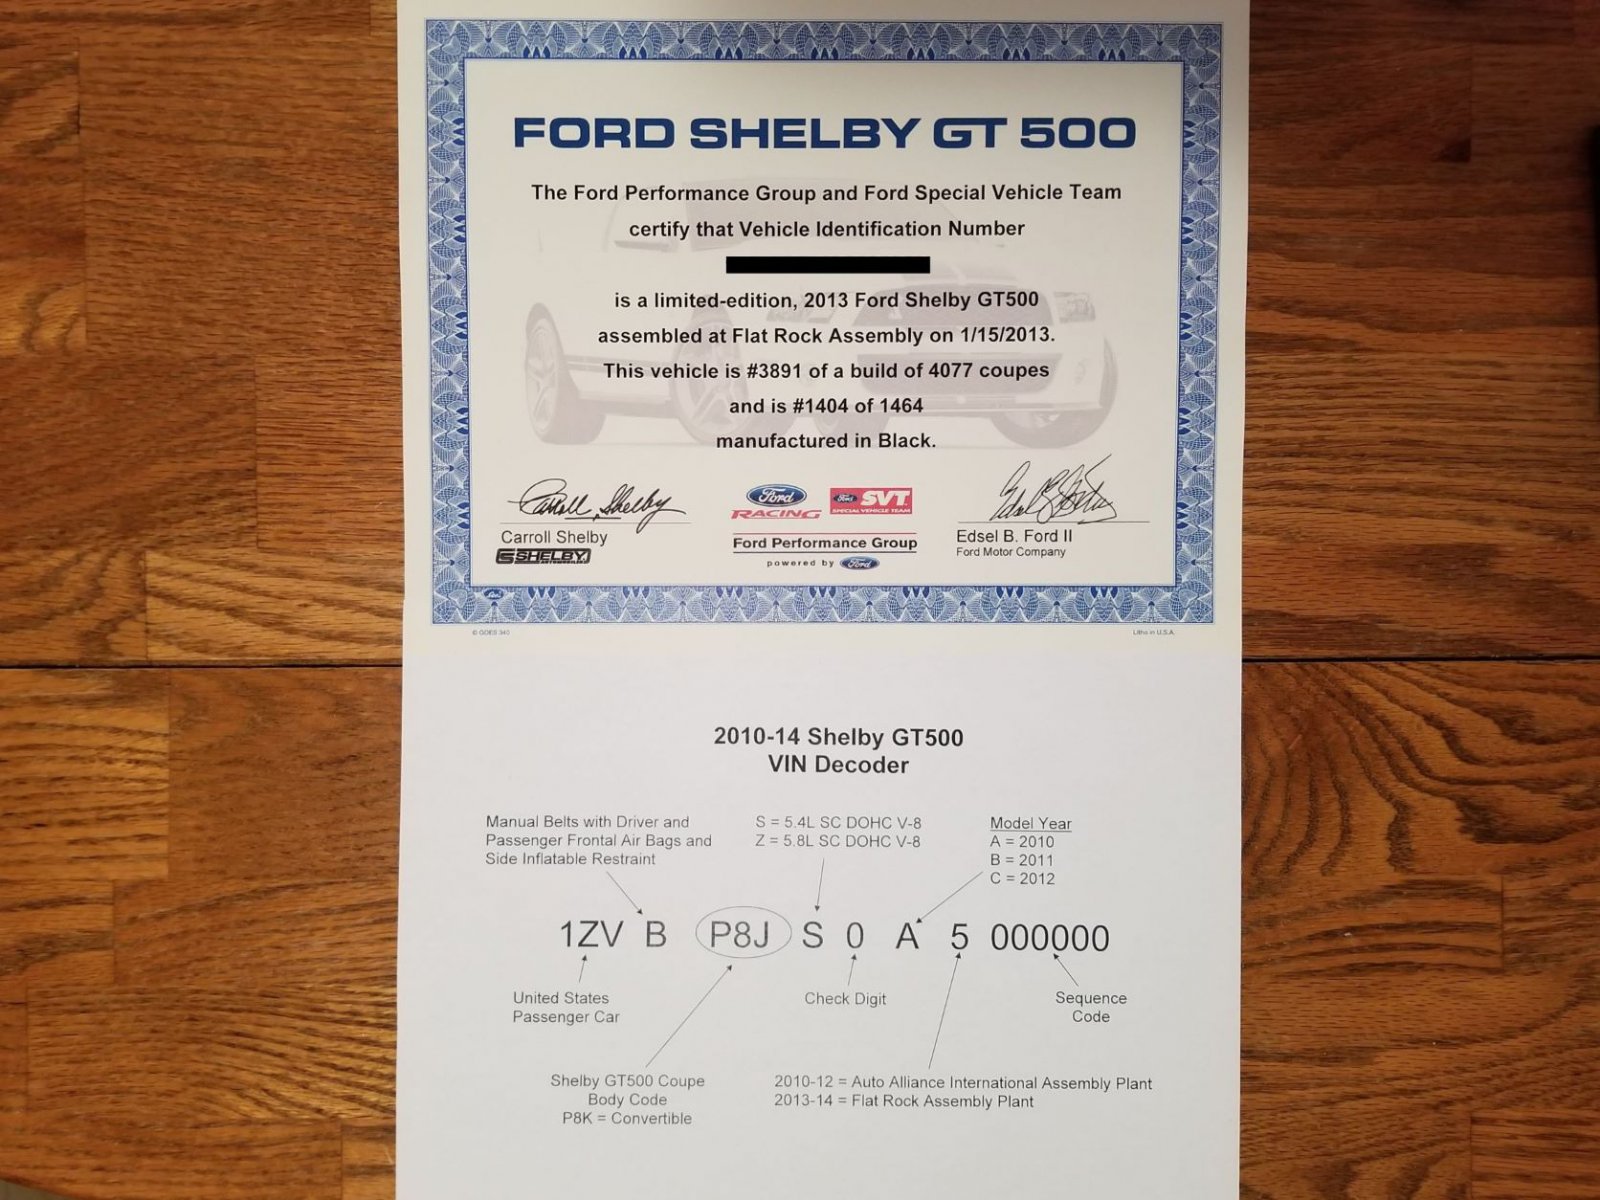 2013 Shelby GT500 Certificate of Authenticity .jpg